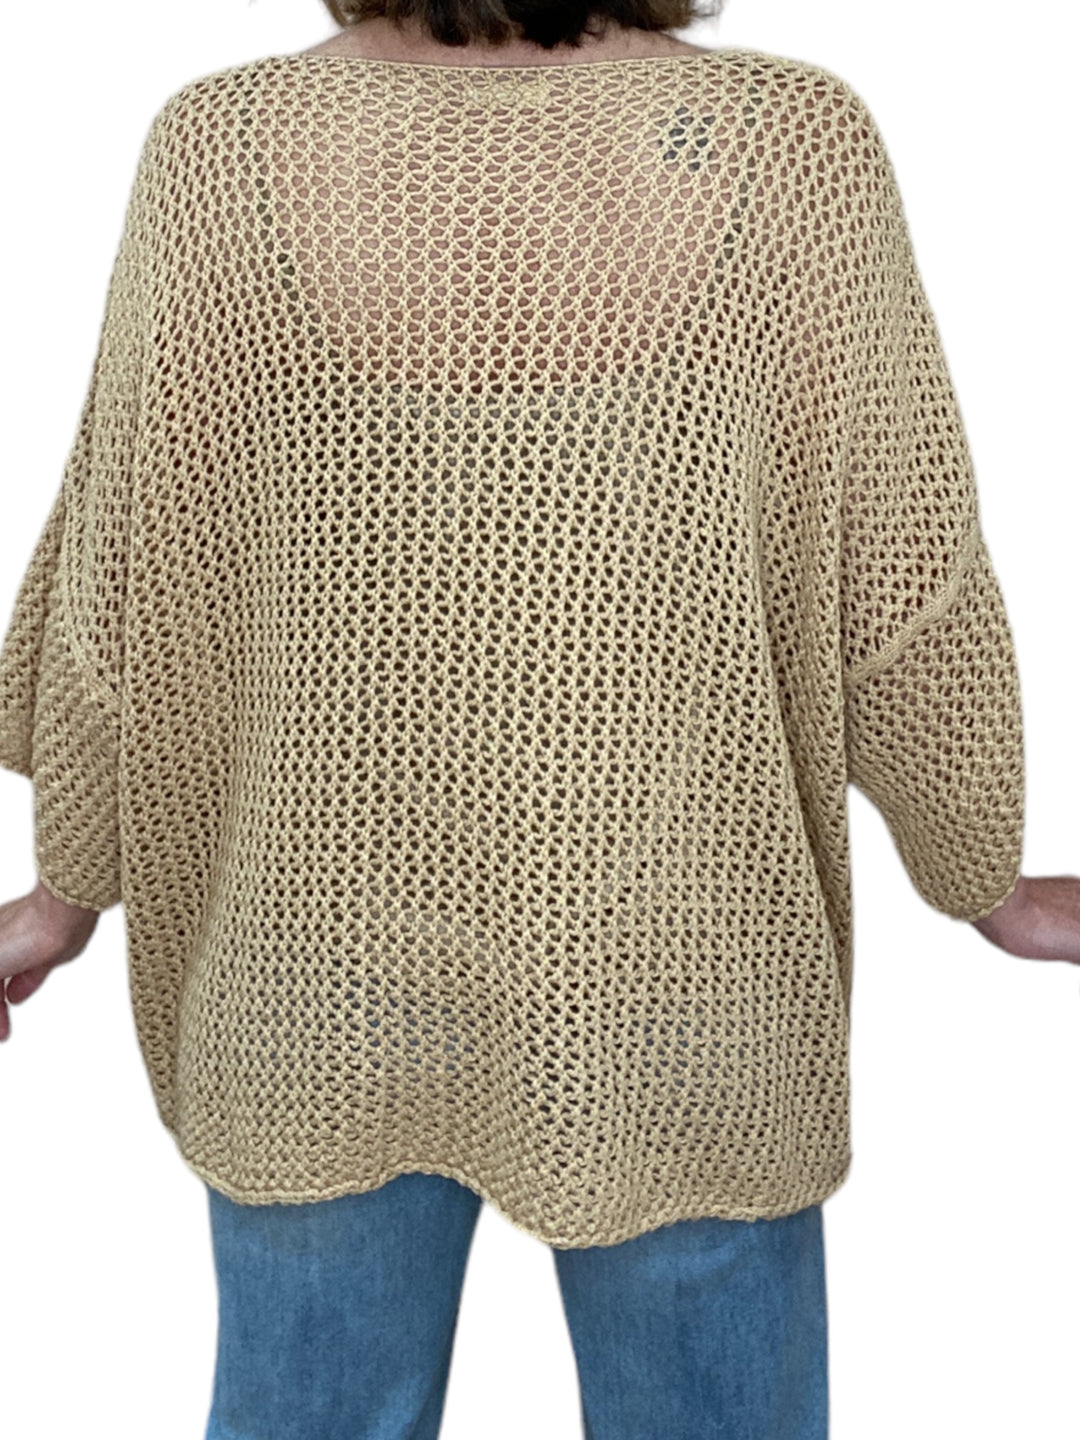 LONG SLEEVE COTTON CROCHET V-NECK TUNIC-CAMEL - Kingfisher Road - Online Boutique